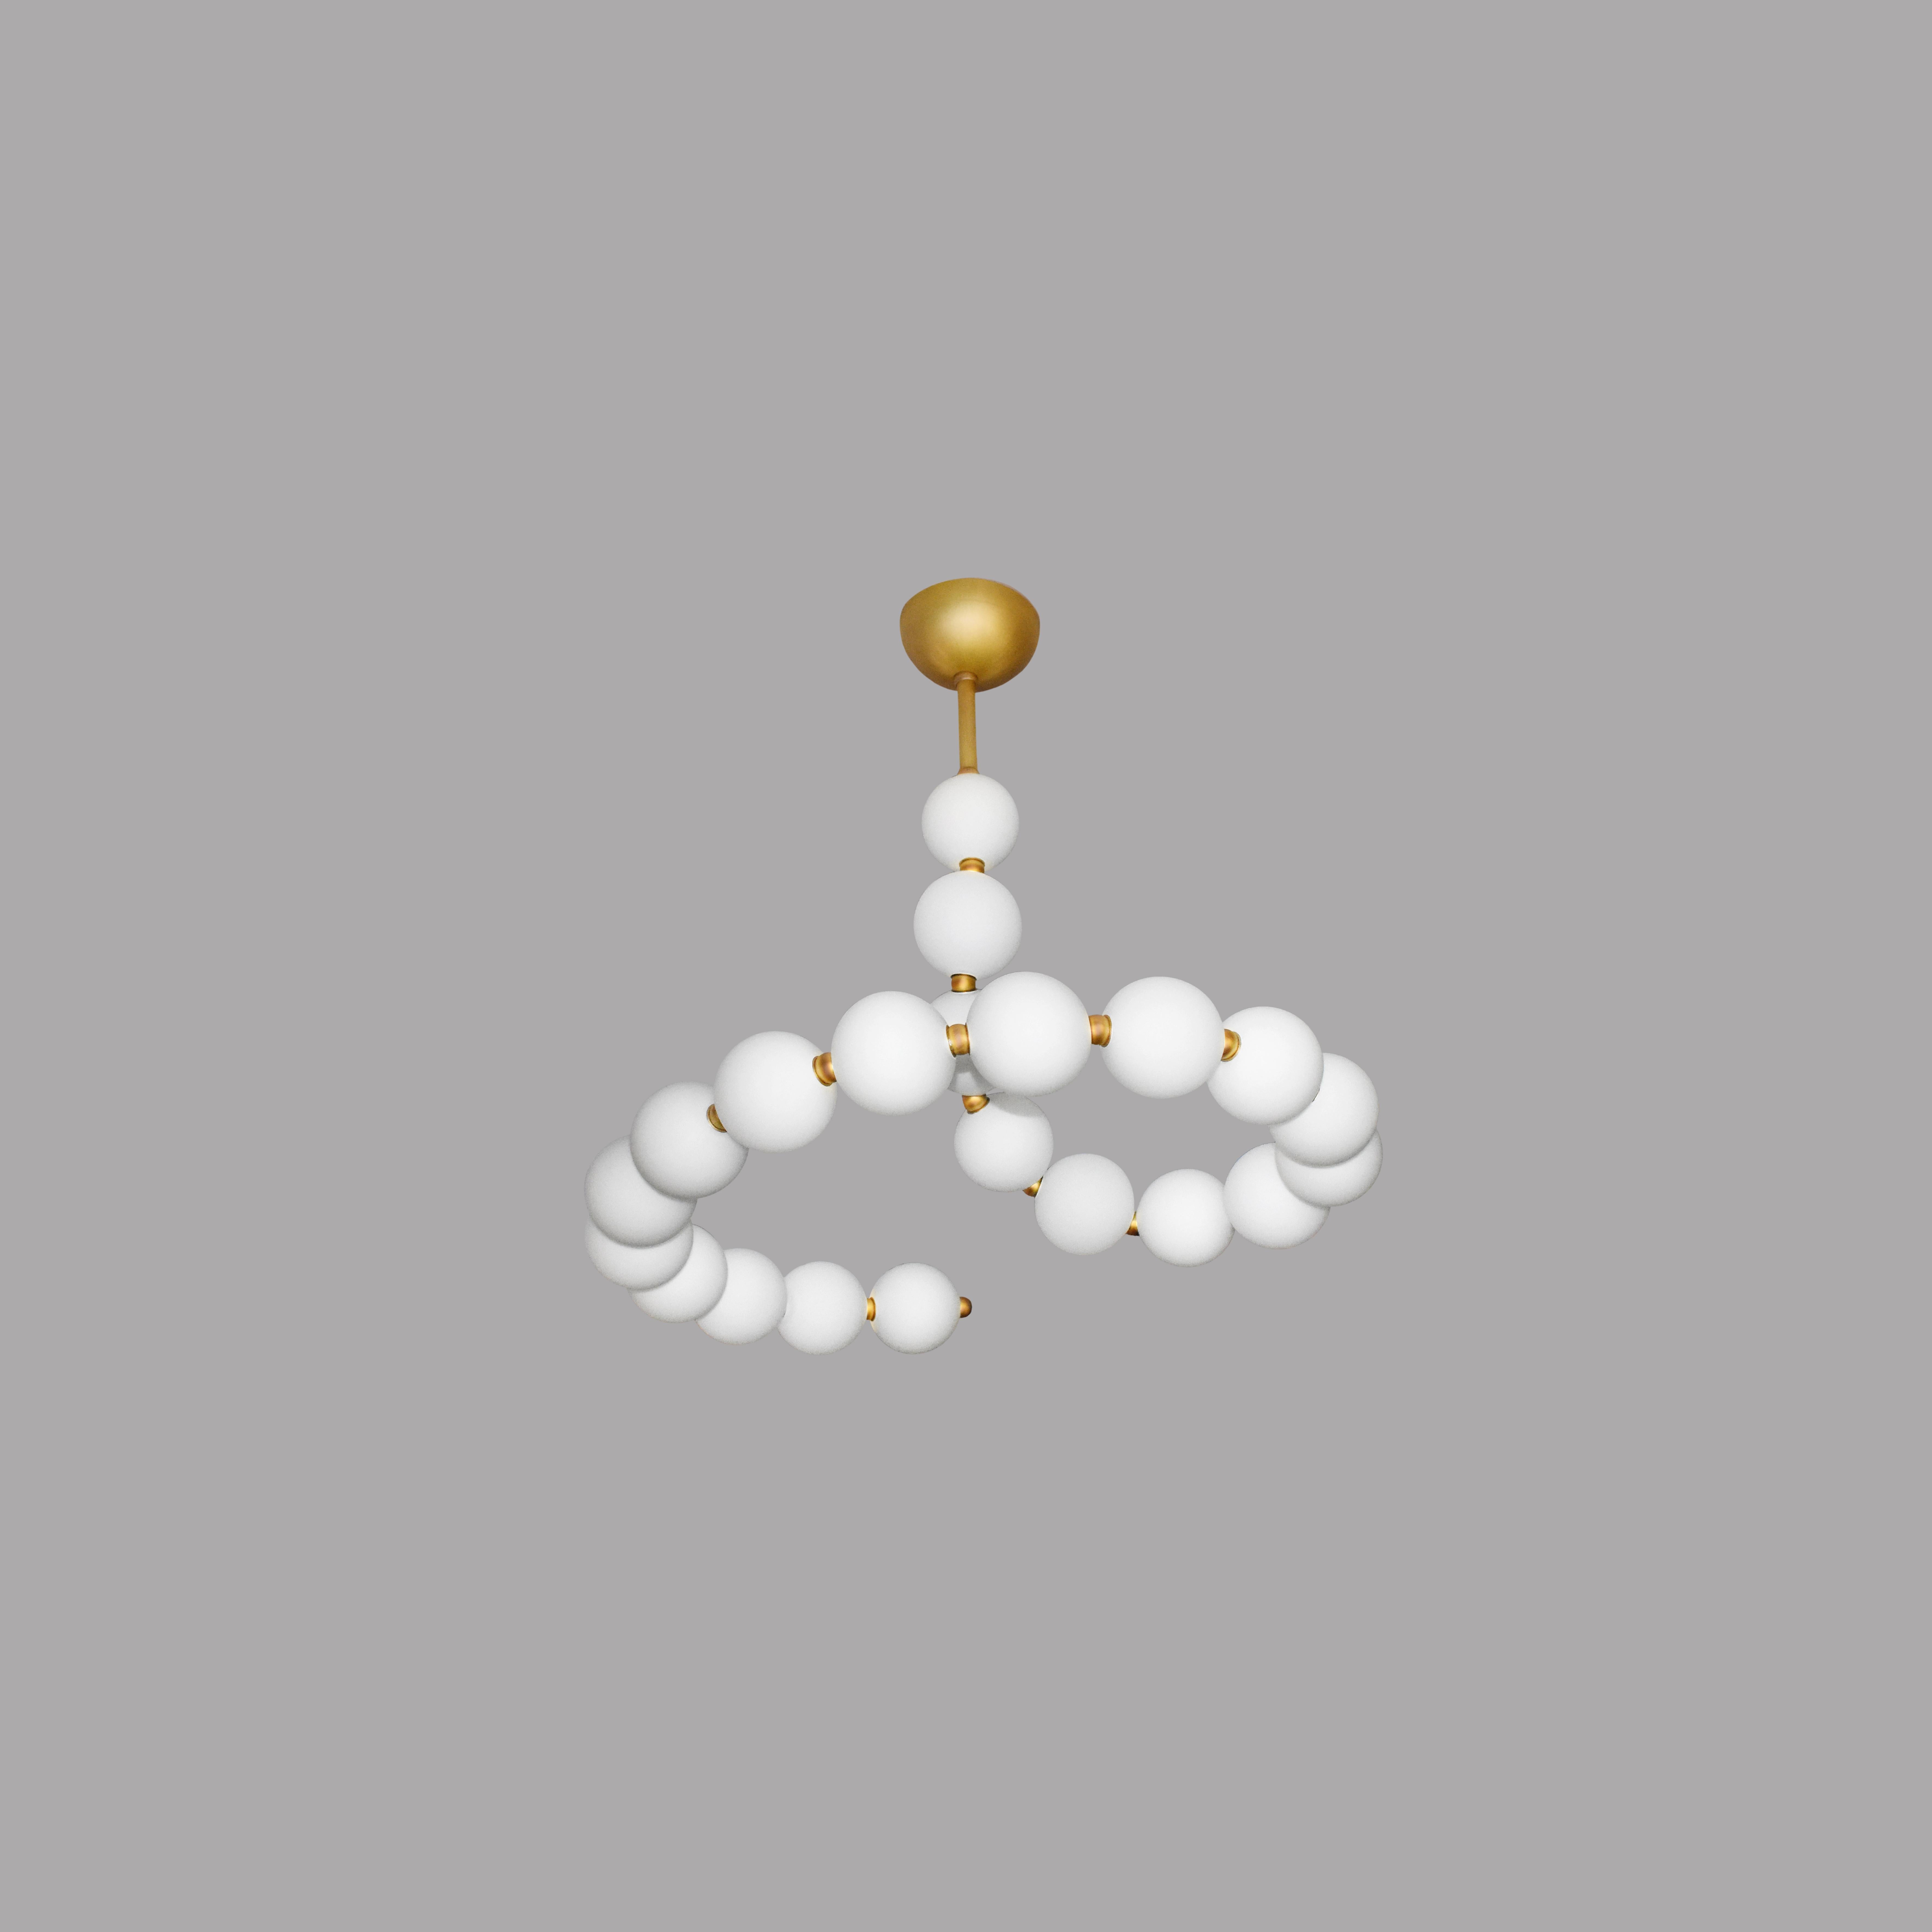 Simple De Perles Chandelier by Ludovic Clément D’armont
Dimensions: Ø 75 x H 75 cm.
Materials: Blown glass and brass.

Every creation of Ludovic Clément d’Armont can be made to order in any requested dimensions. Pearls have a diameter of 10 cm.